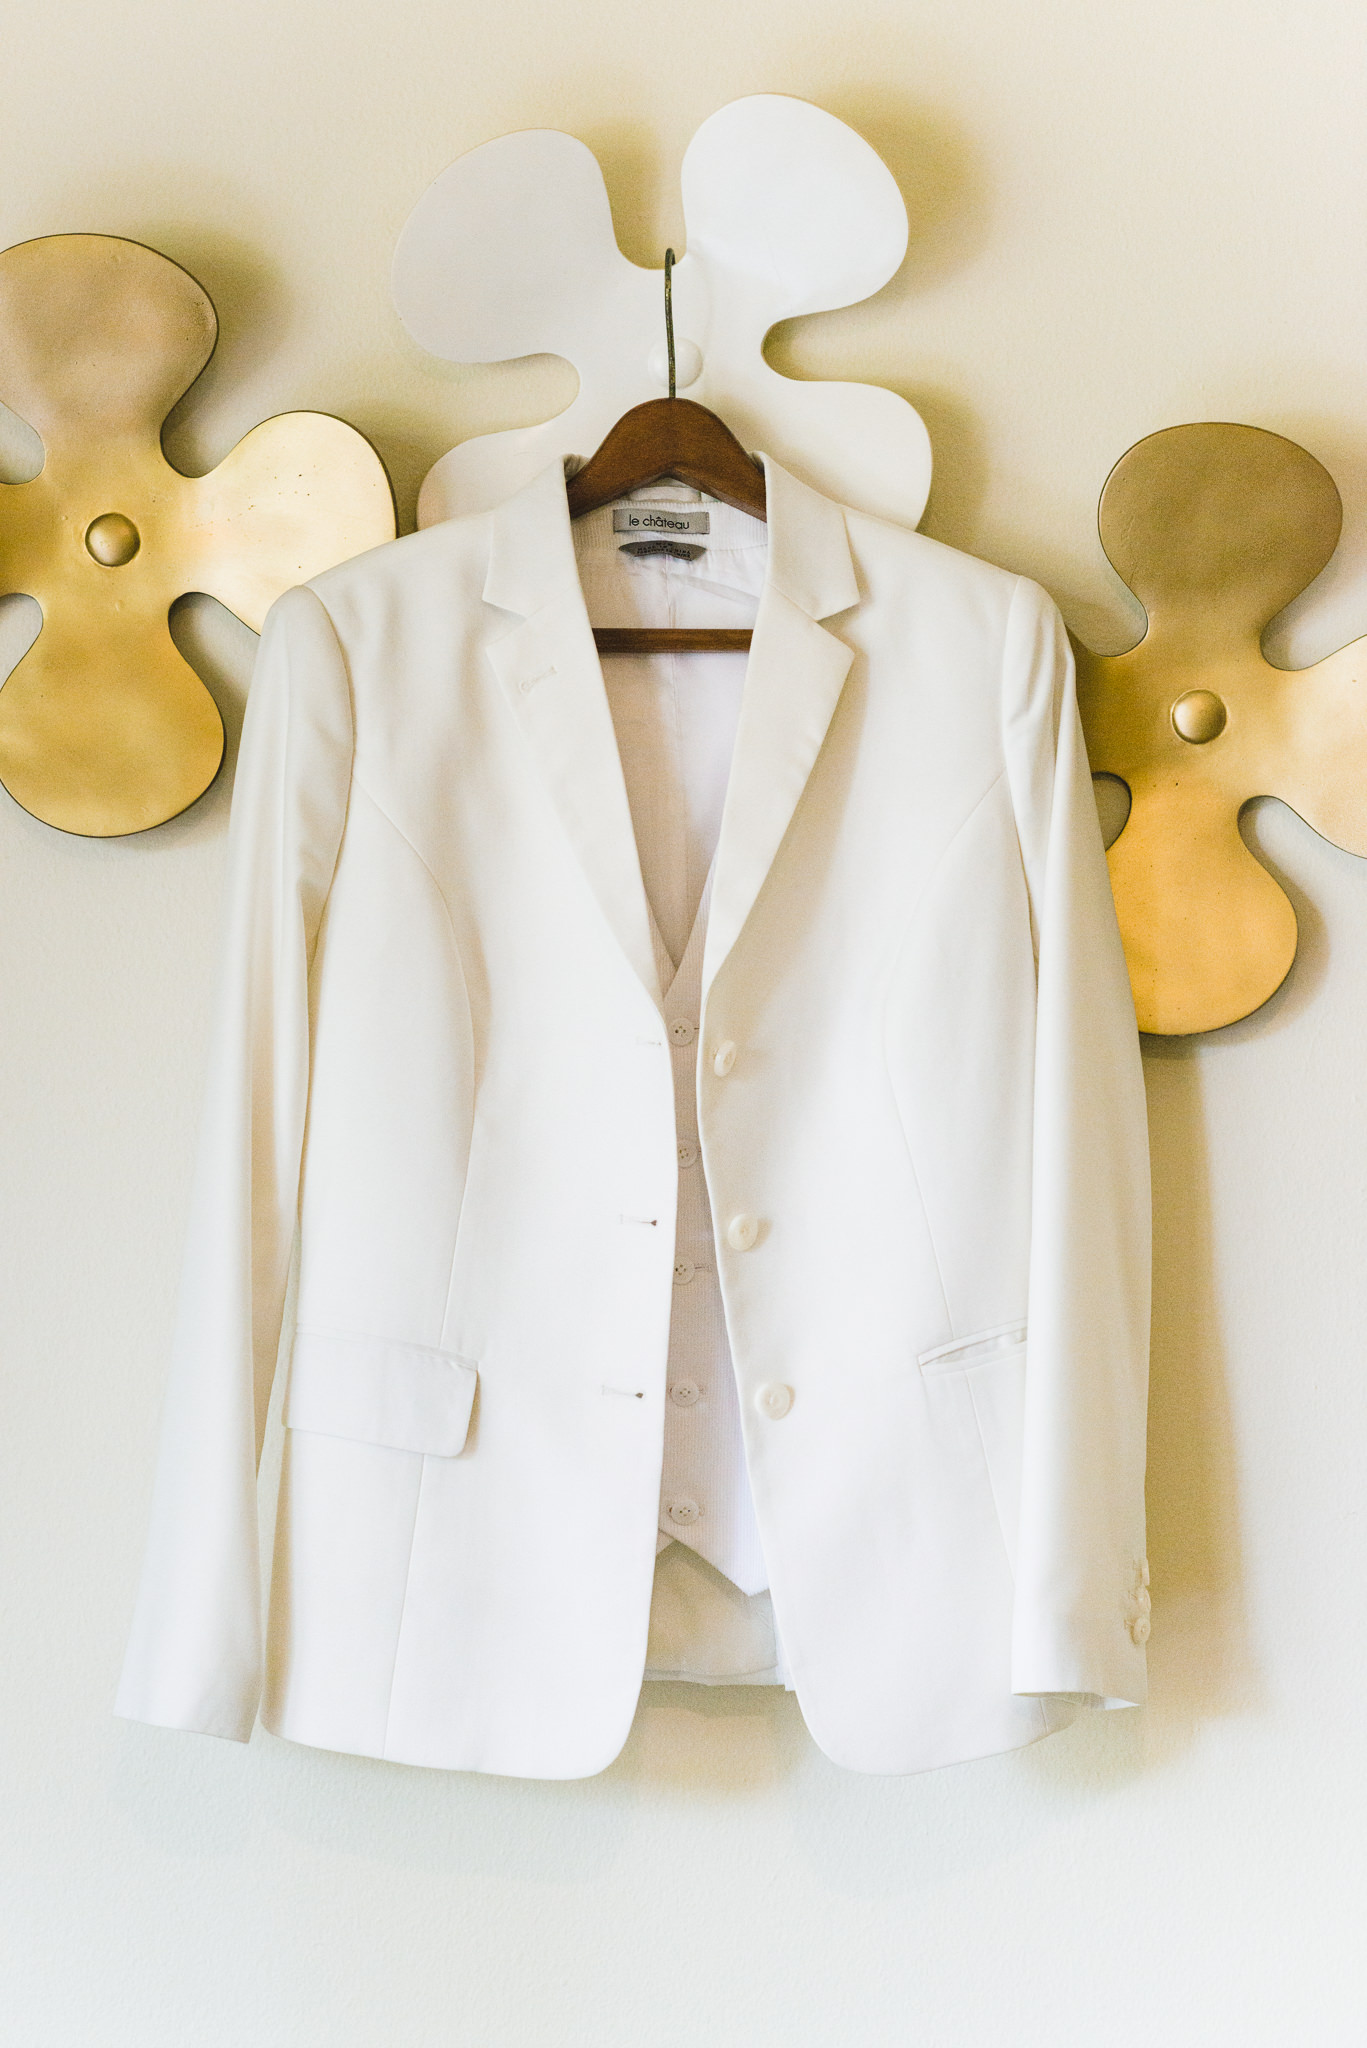 brides white wedding jacket hanging up on the wall at Now Sapphire Resort in Mexico